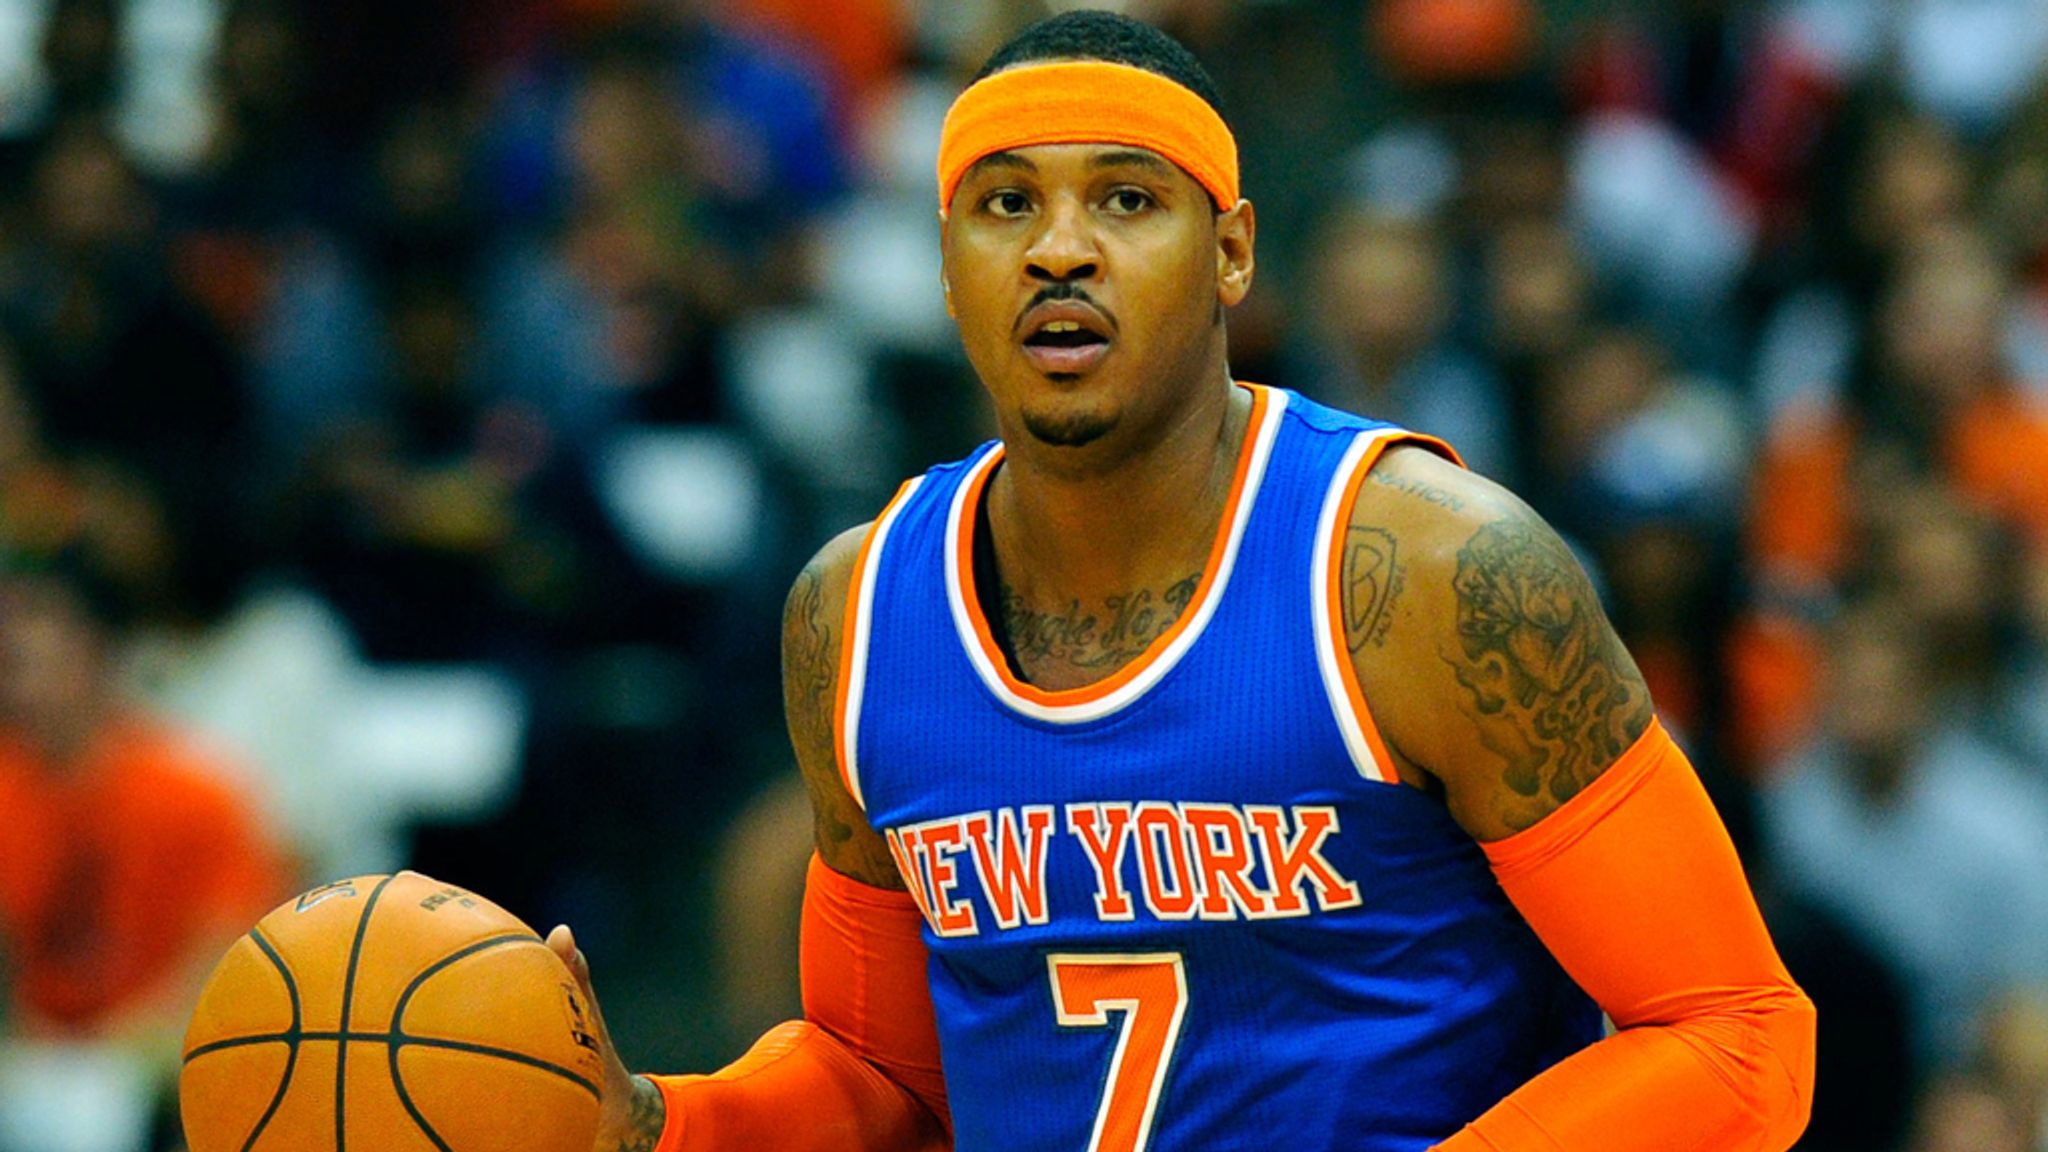 New York Knicks Carmelo Anthony rubs his eye in the fourth quarter